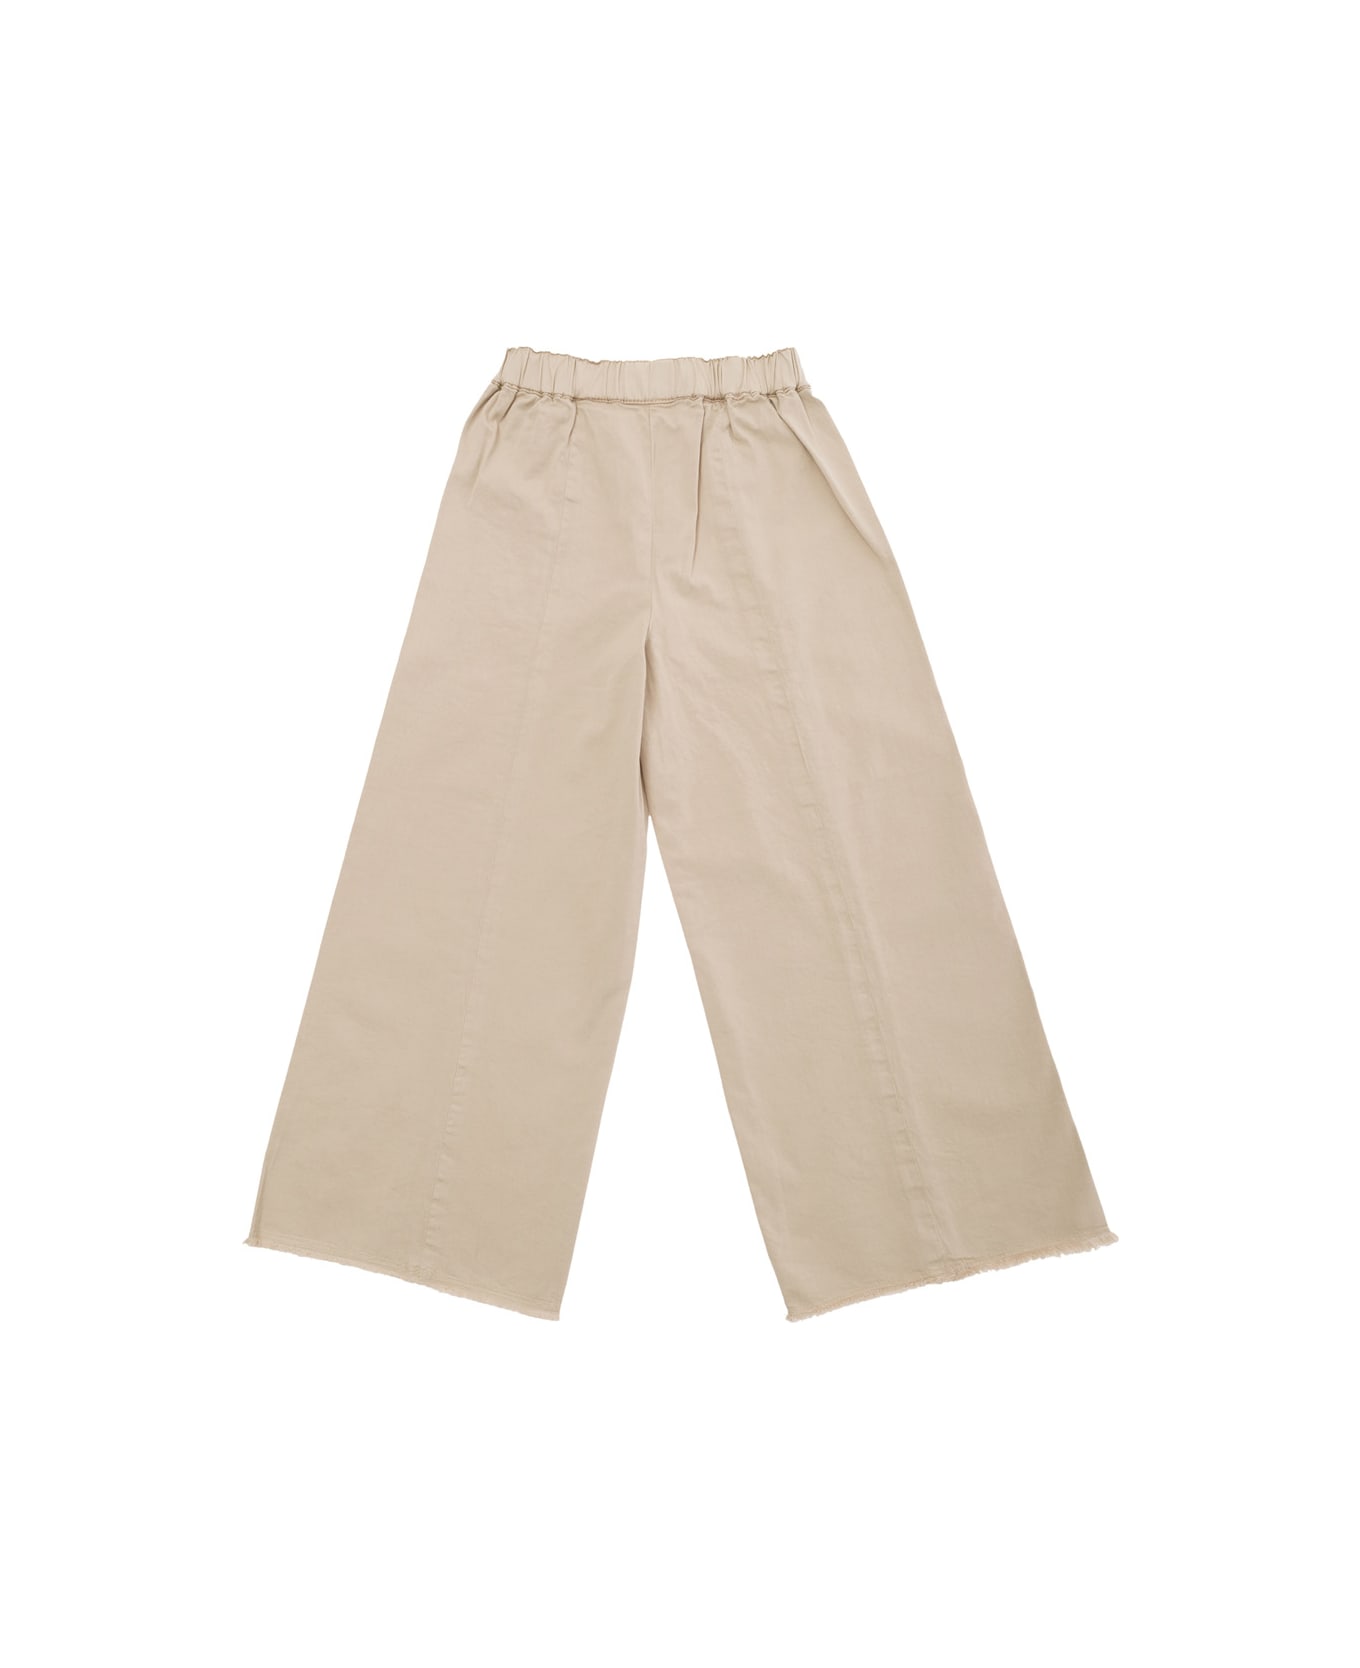 Il Gufo Beige Pants With Elastic Waistband In Stretch Cotton Girl - Beige ボトムス